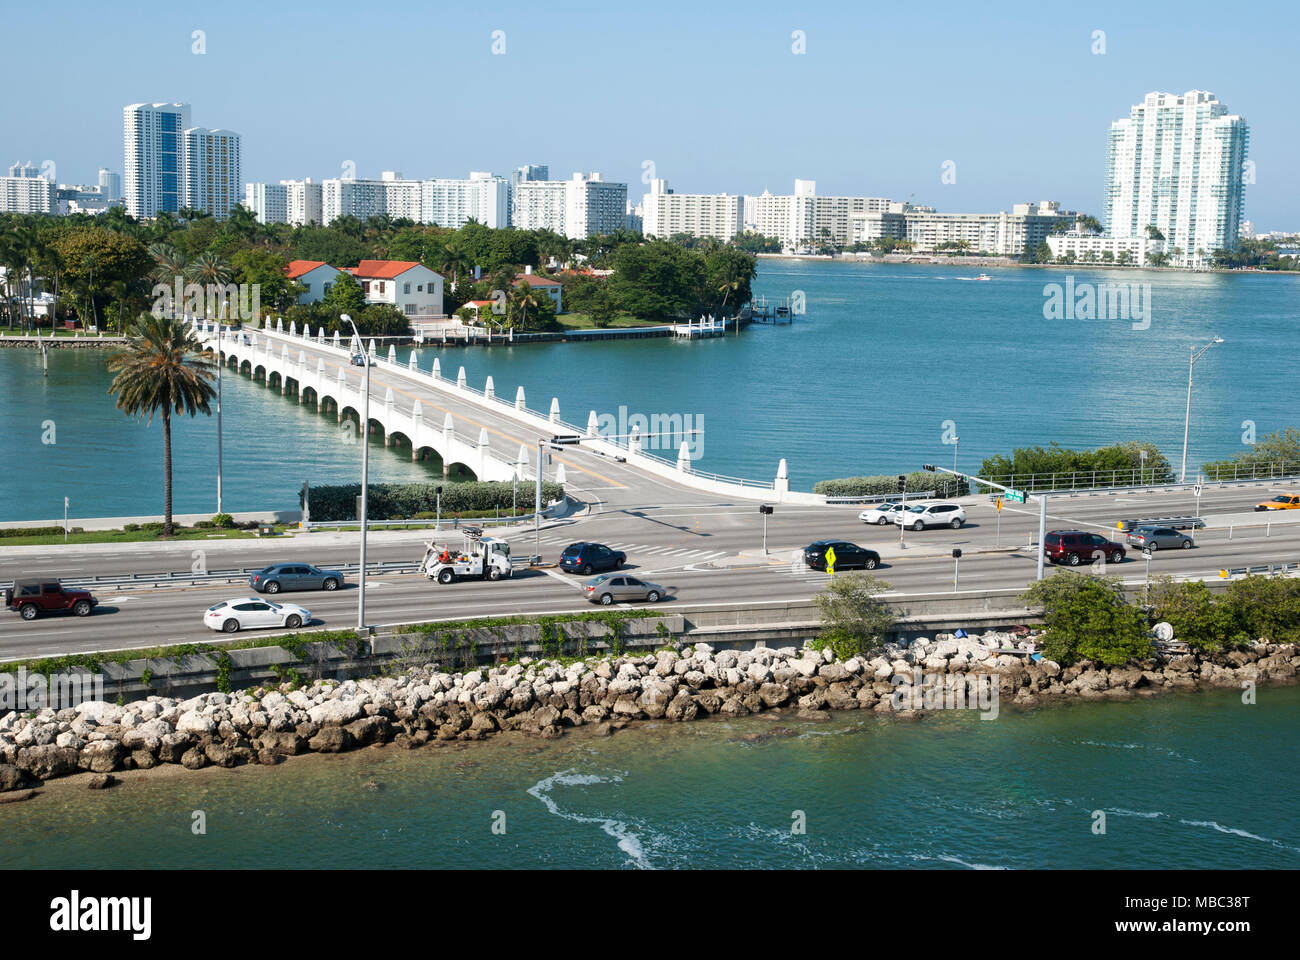 The view of Miami city MacArthur Causeway passing by the bridge - entrance to Palm island (Florida). Stock Photo